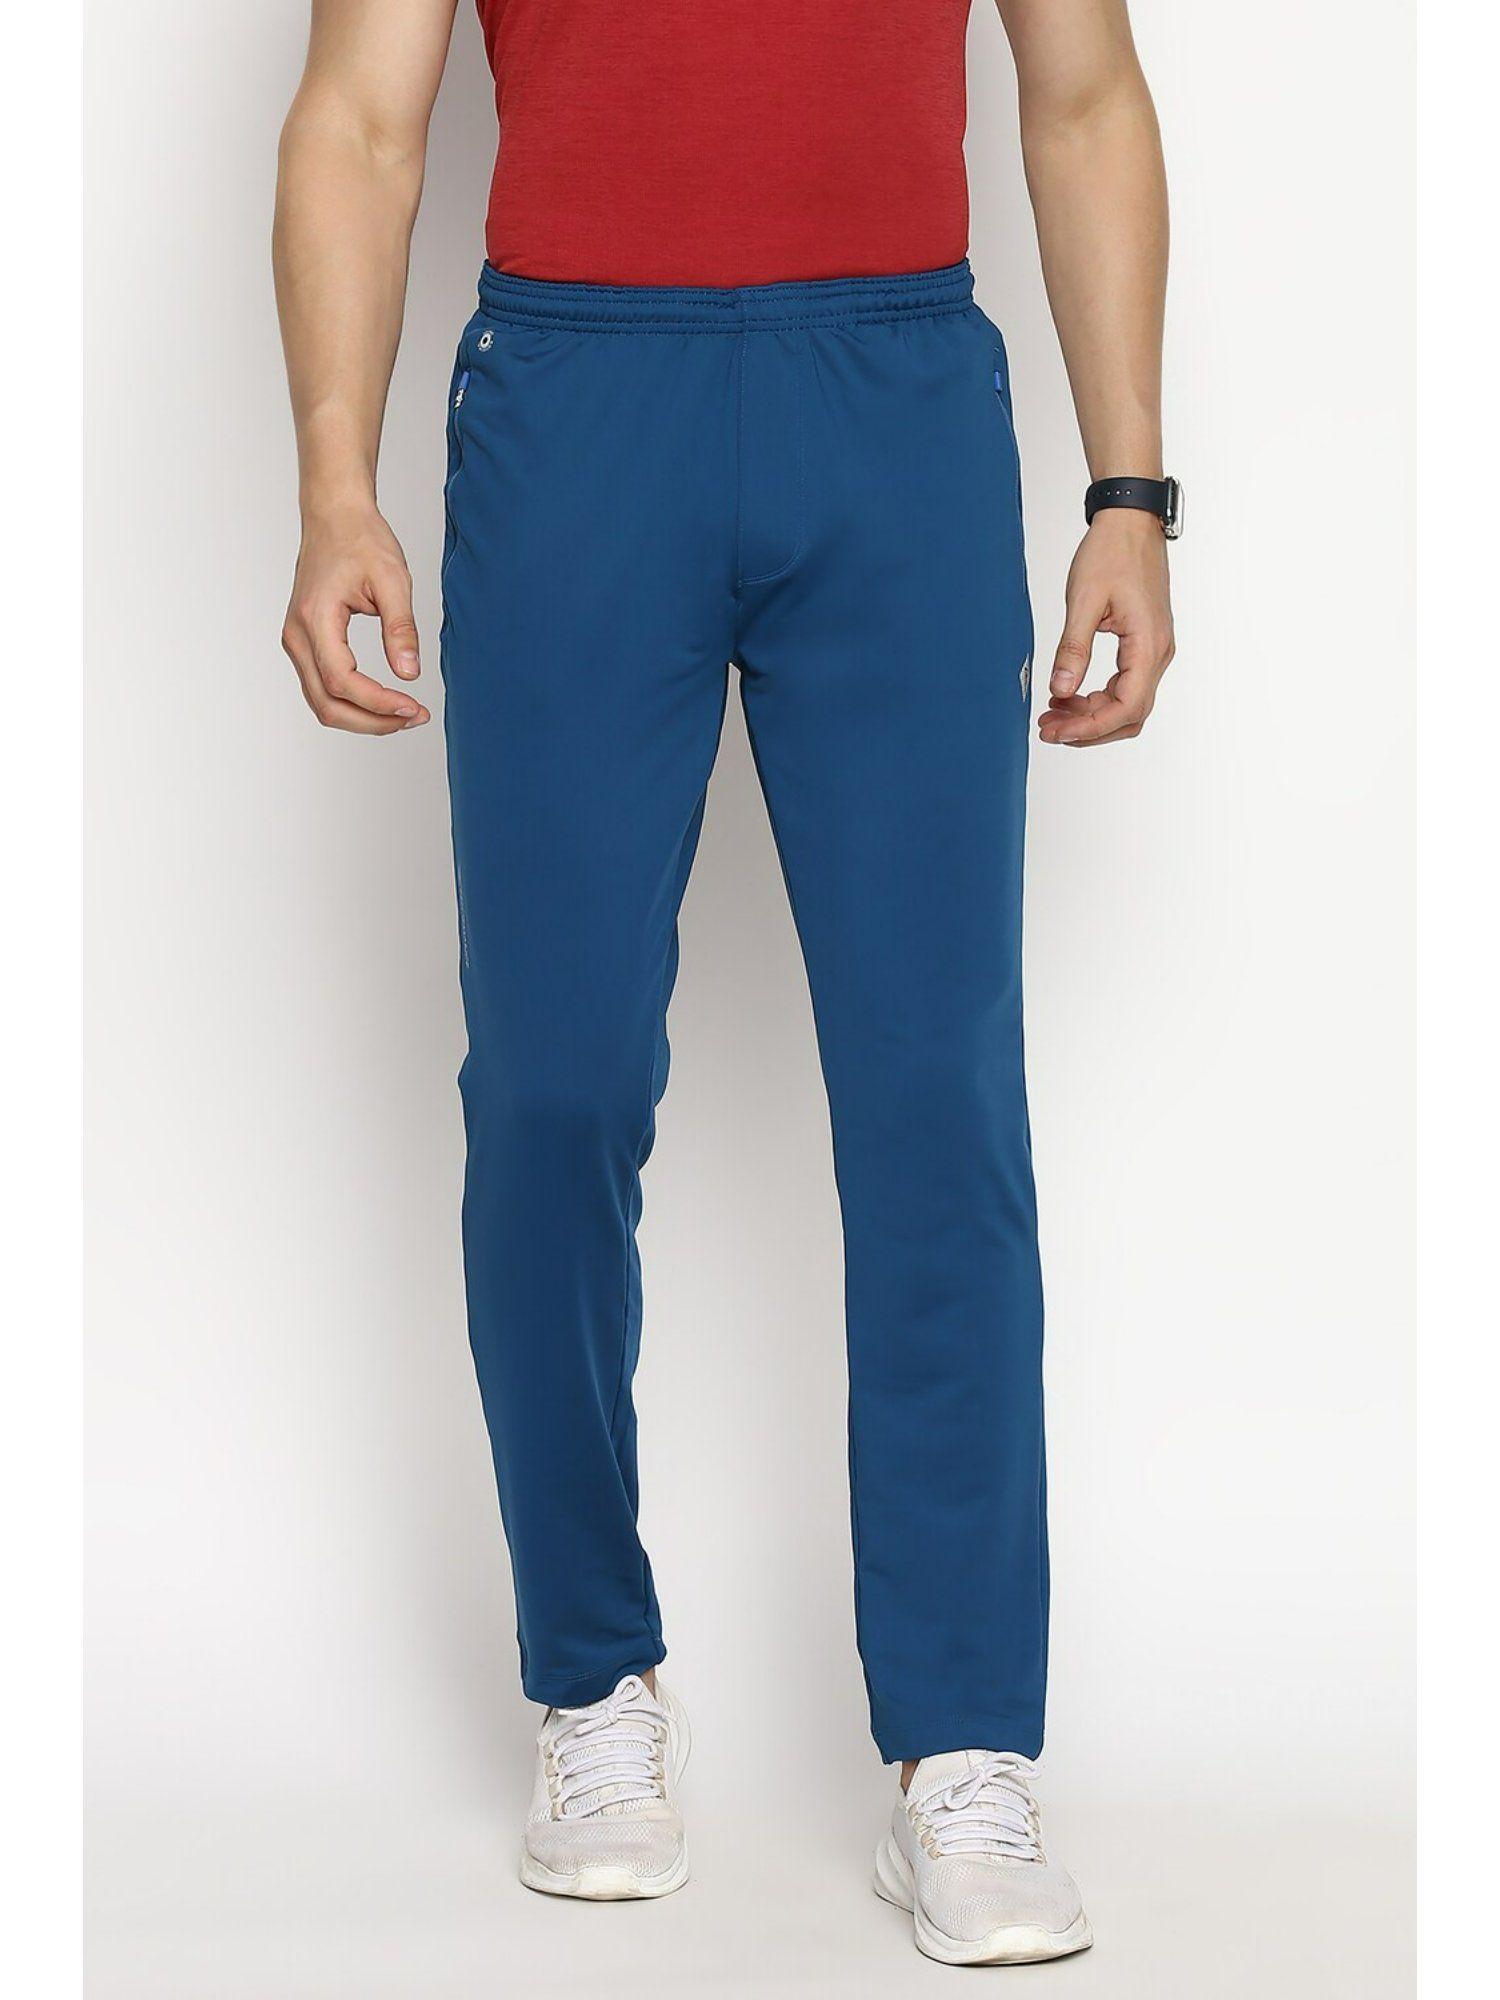 performance-men-swift-dry-&-4-way-stretch-trackpants---coral-depth